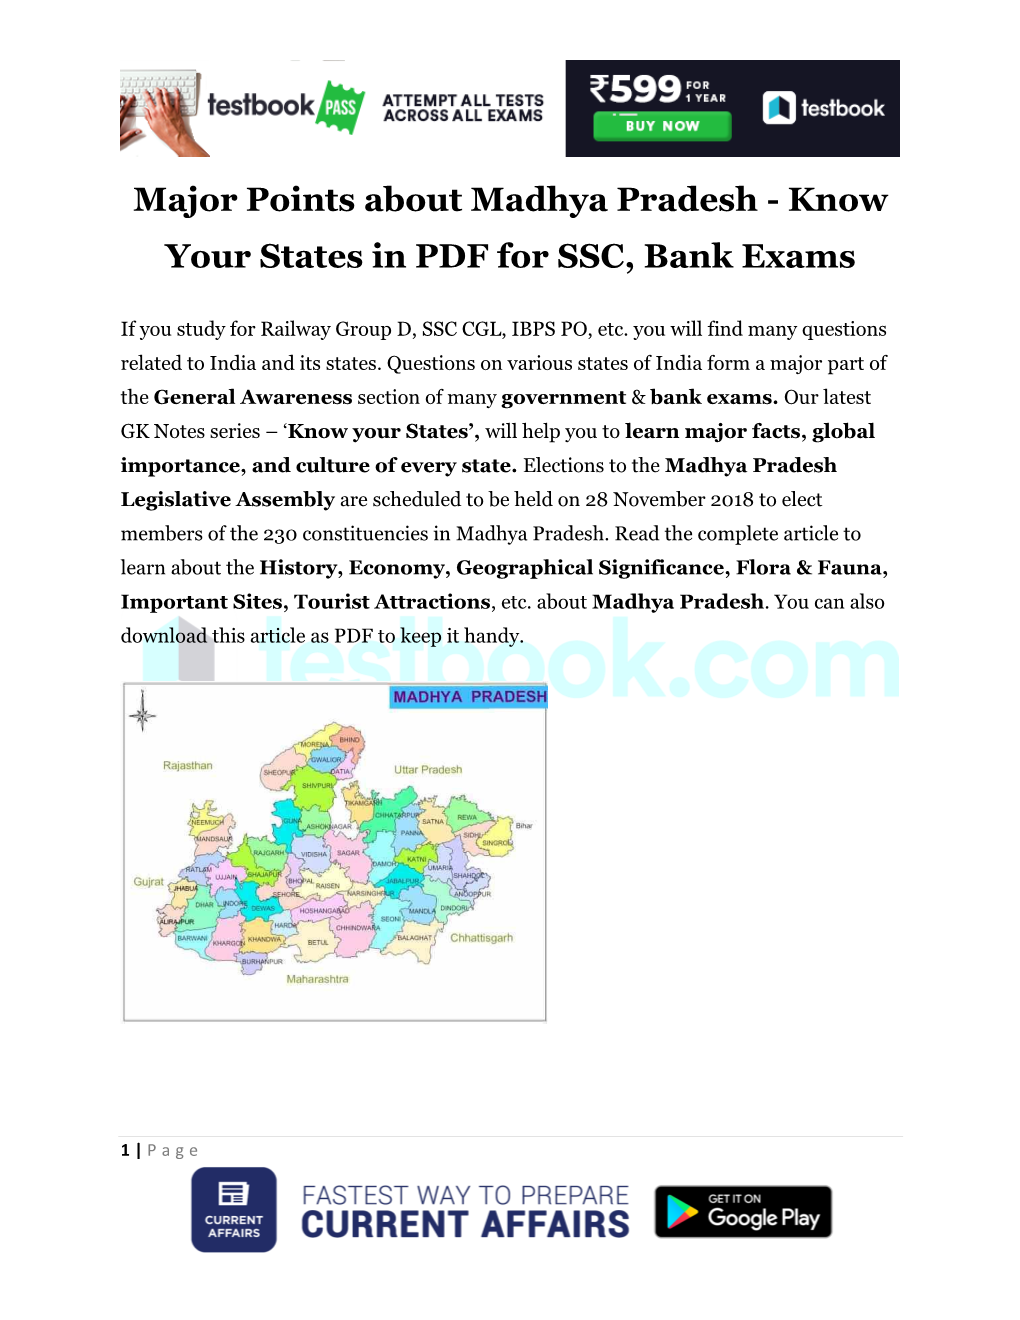 Major Points About Madhya Pradesh - Know Your States in PDF for SSC, Bank Exams